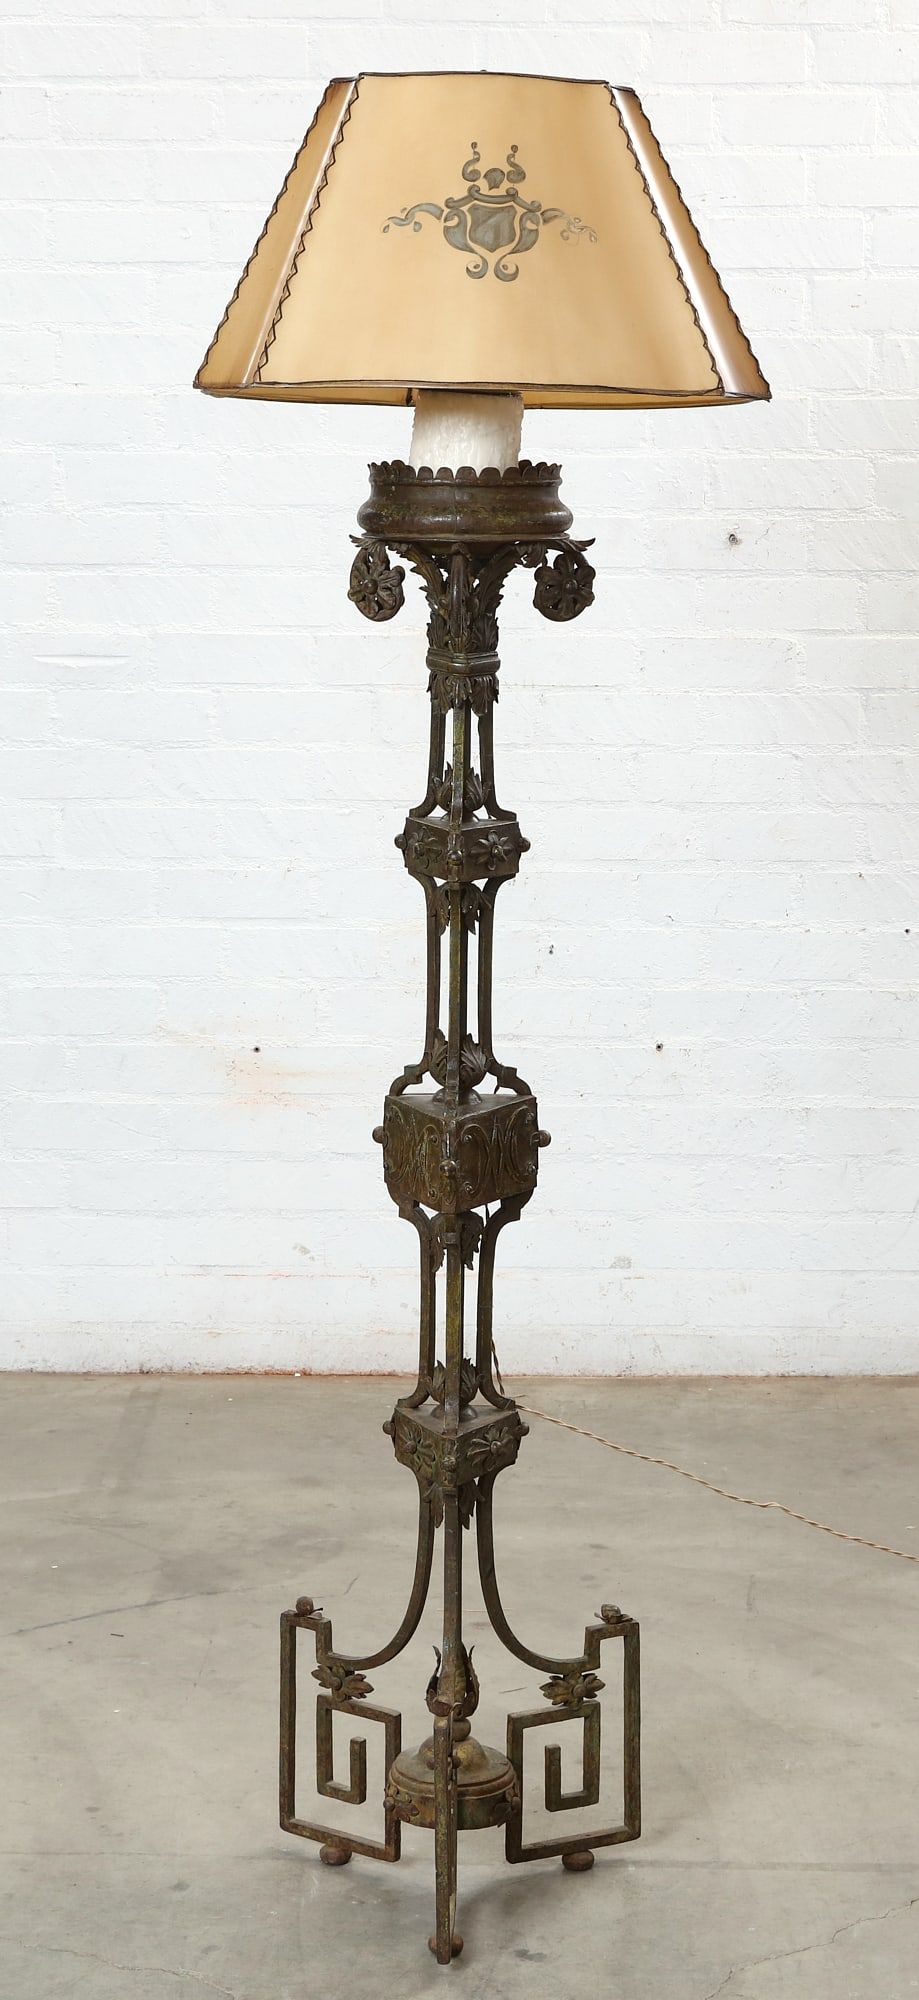 A BAROQUE STYLE BRONZE PAINTED 2fb2d4e